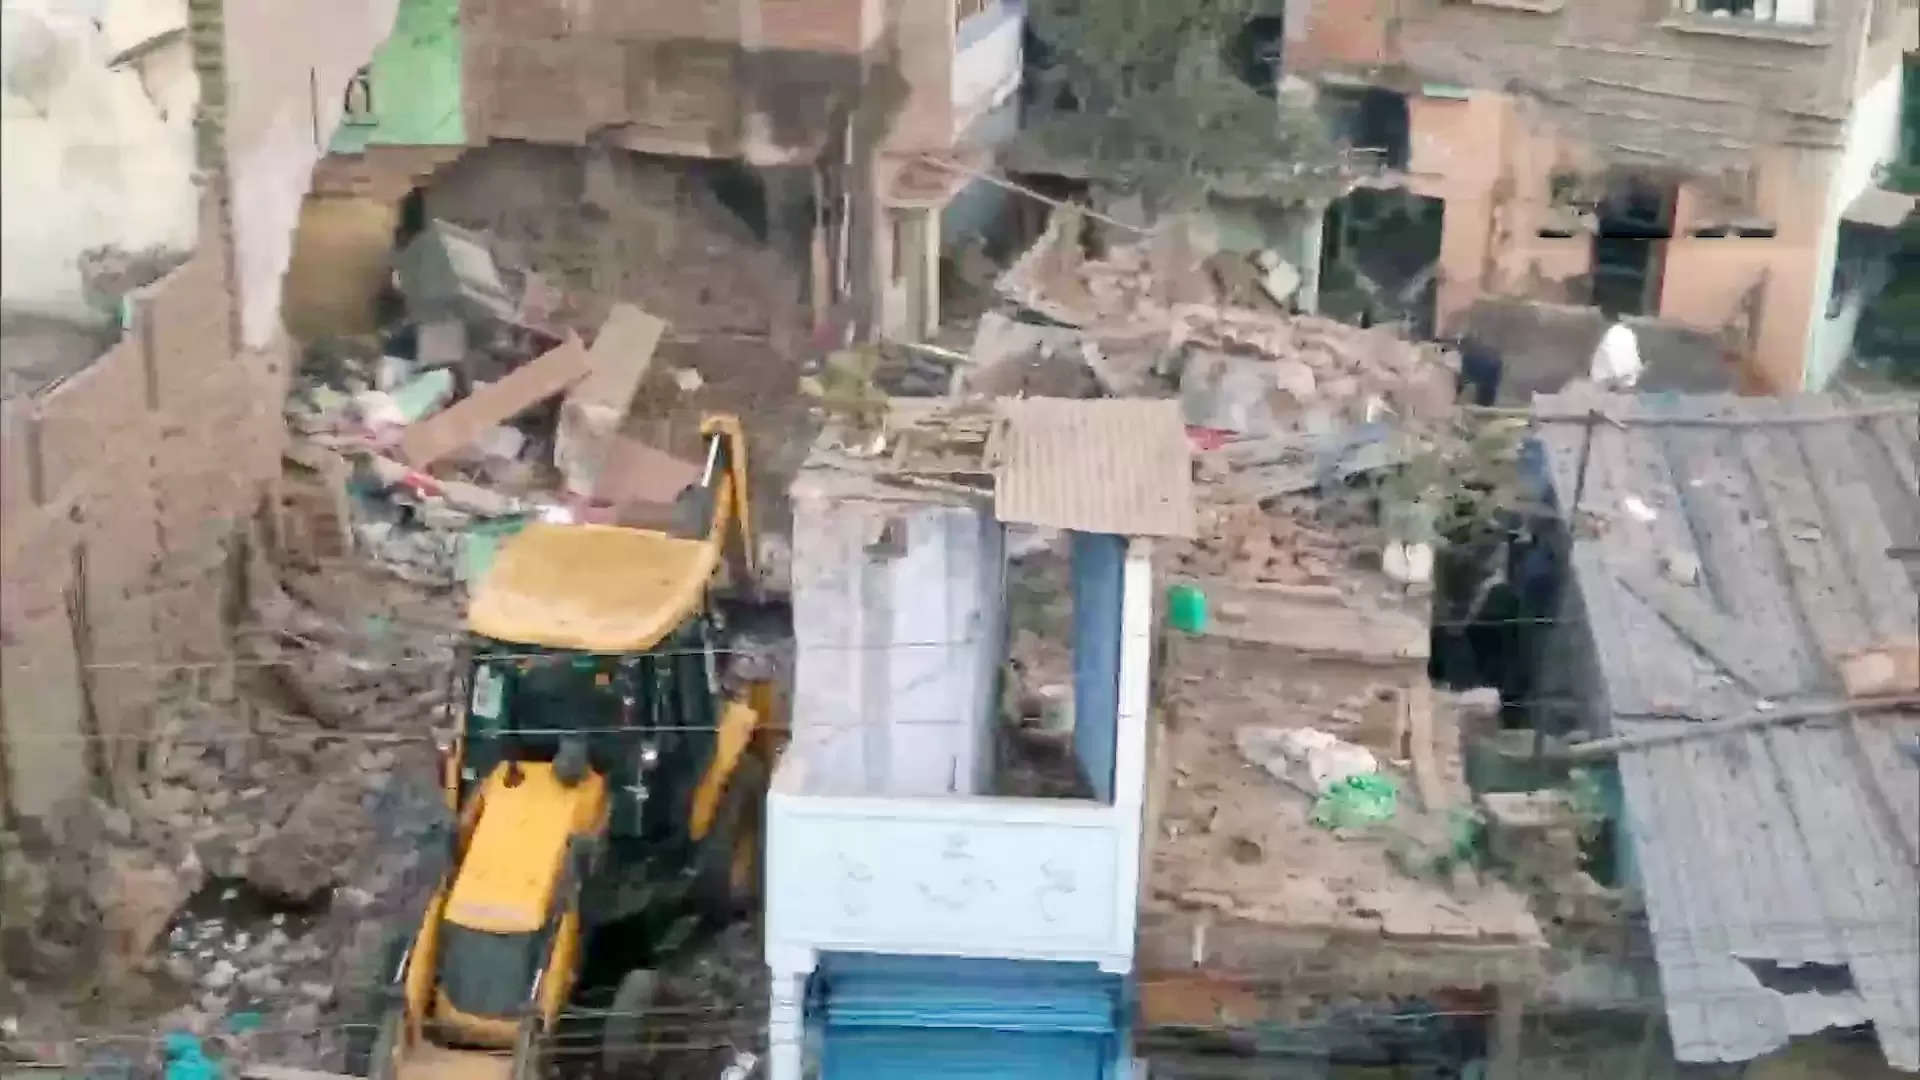 House collapsed due to explosion in Bhagalpur, six people died, the explosion was so strong that 4 nearby houses were demolished